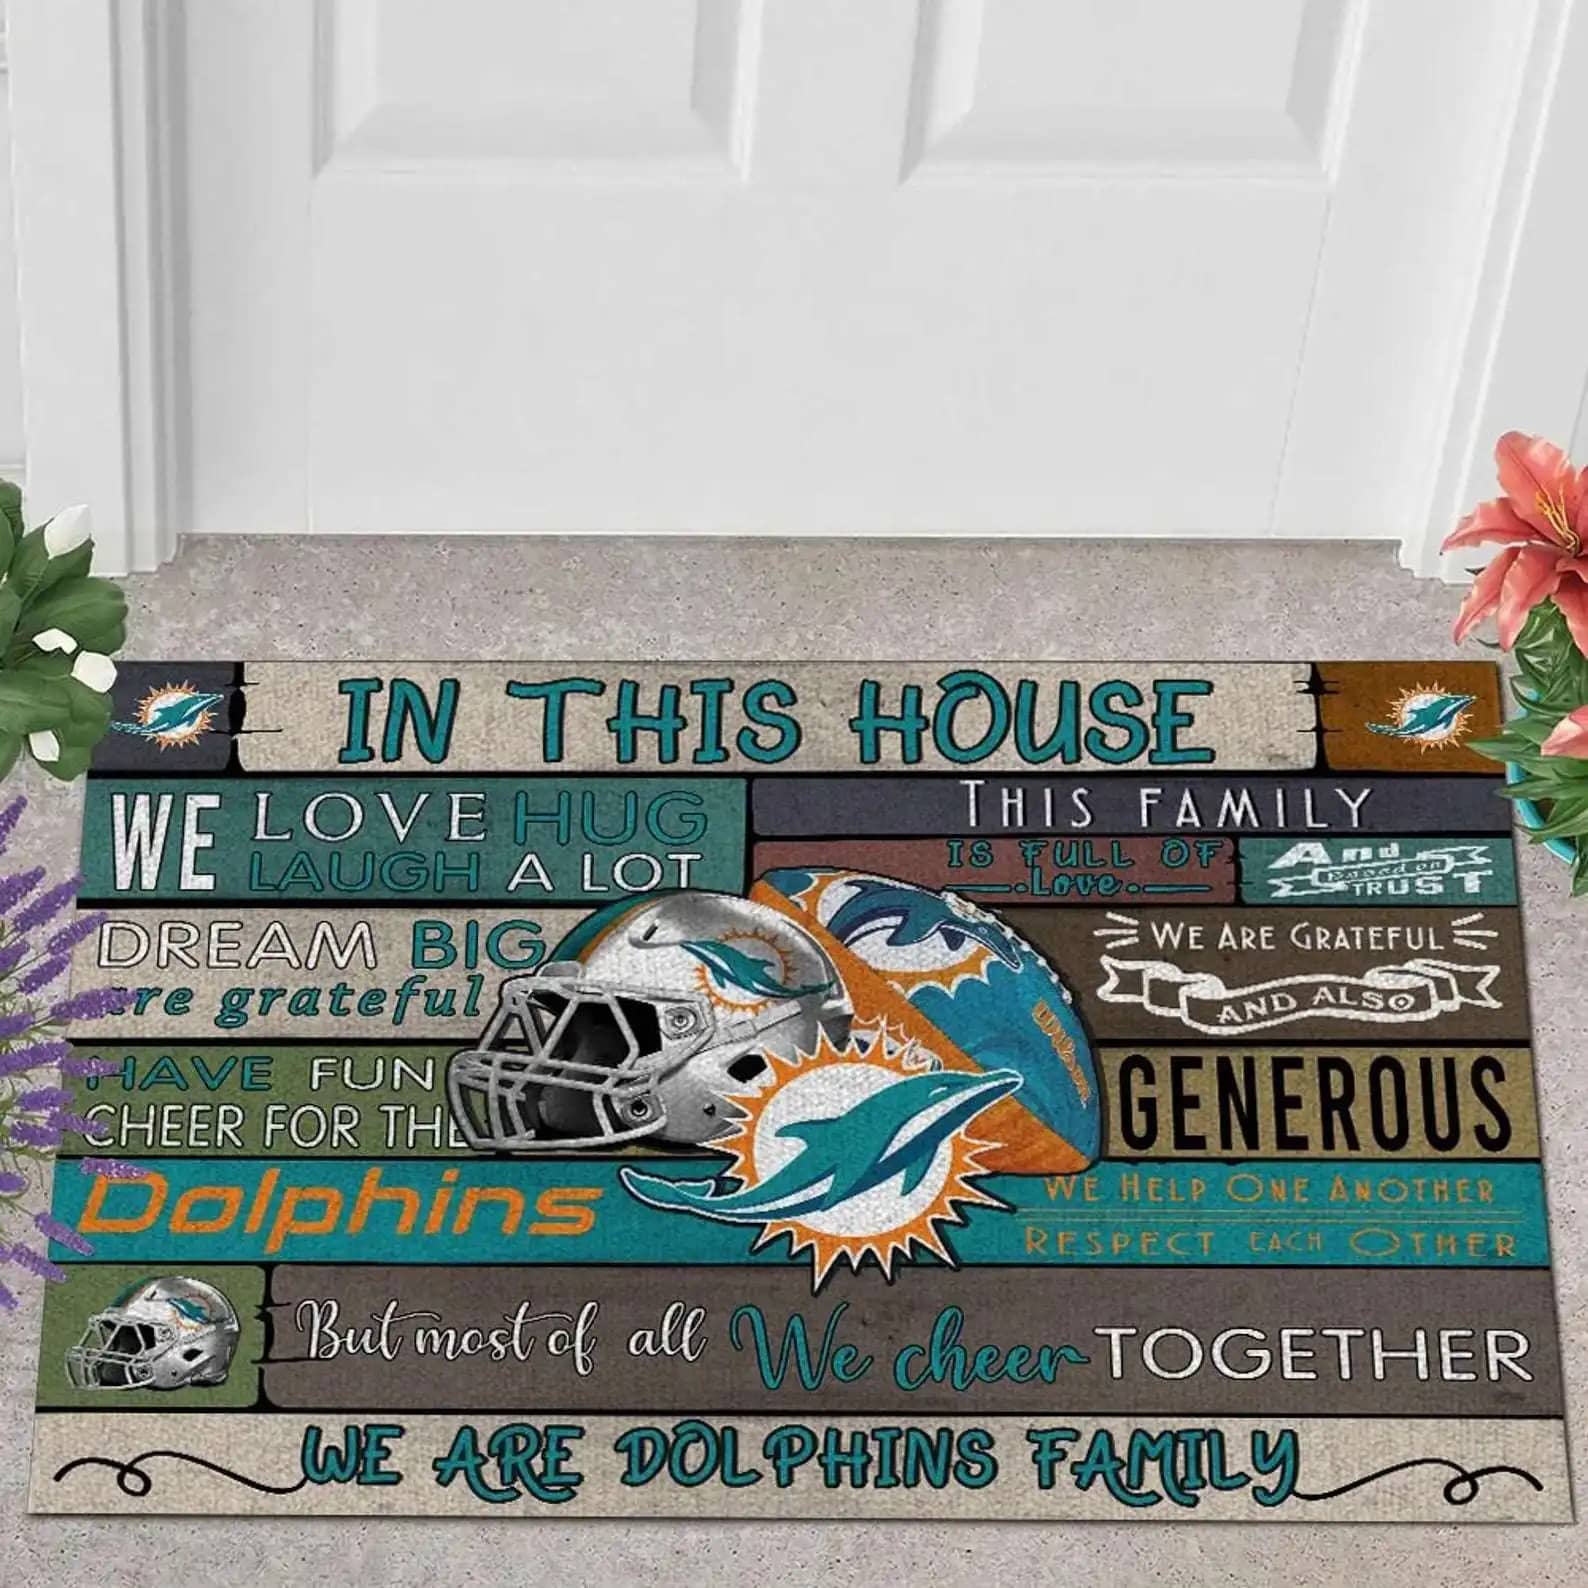 We Help One Another Respect Each Other Doormat